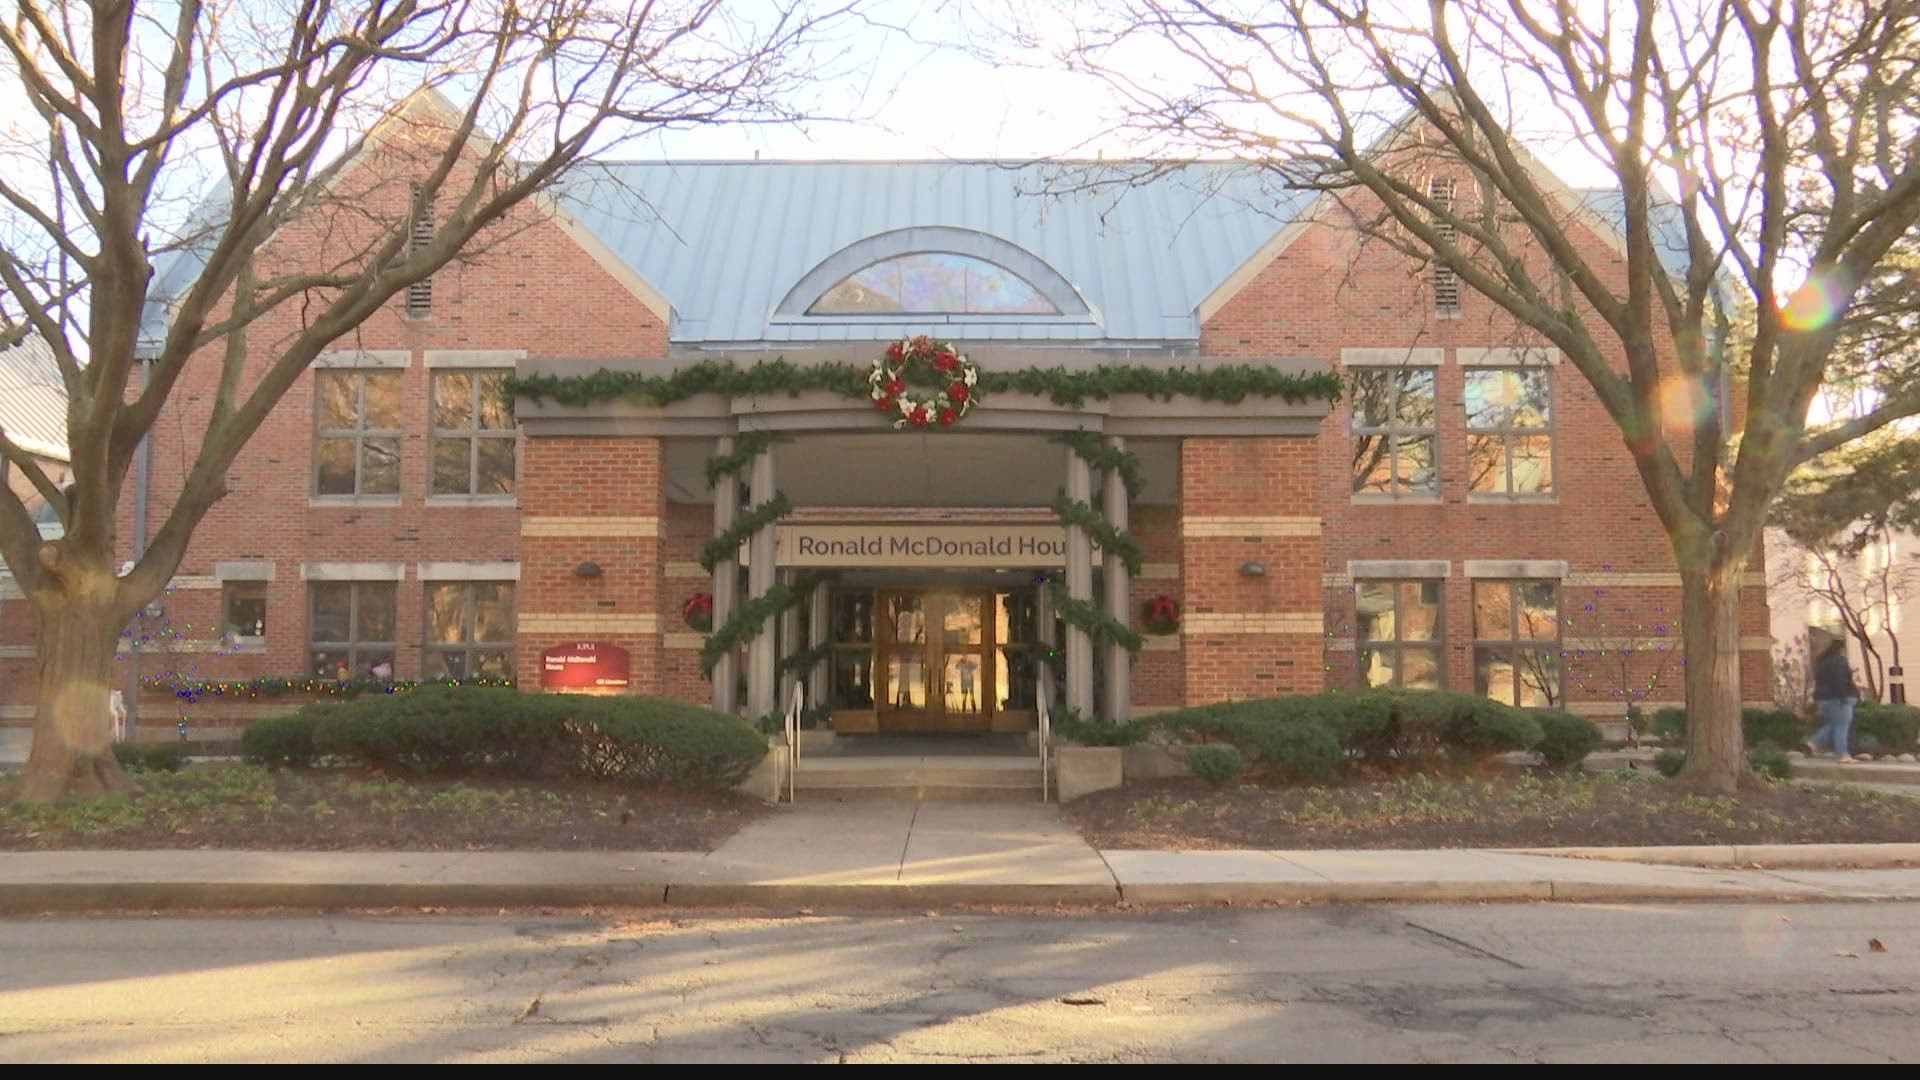 The Ronald McDonald House of Central Indiana provides an inviting home away from home for families this Christmas.